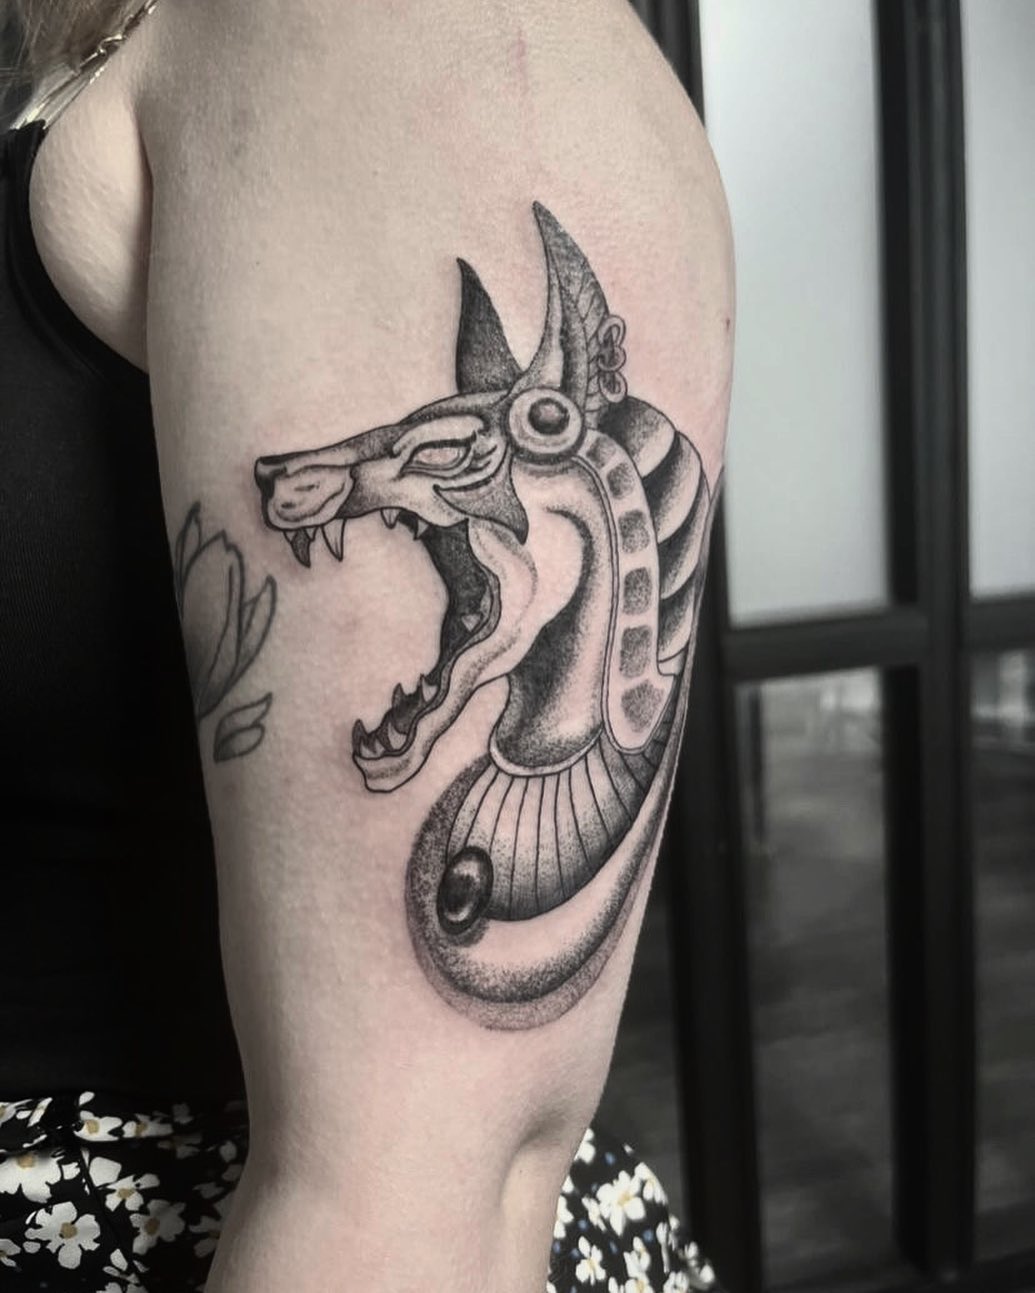 This terrifying Anubis design will stand out on your arm.